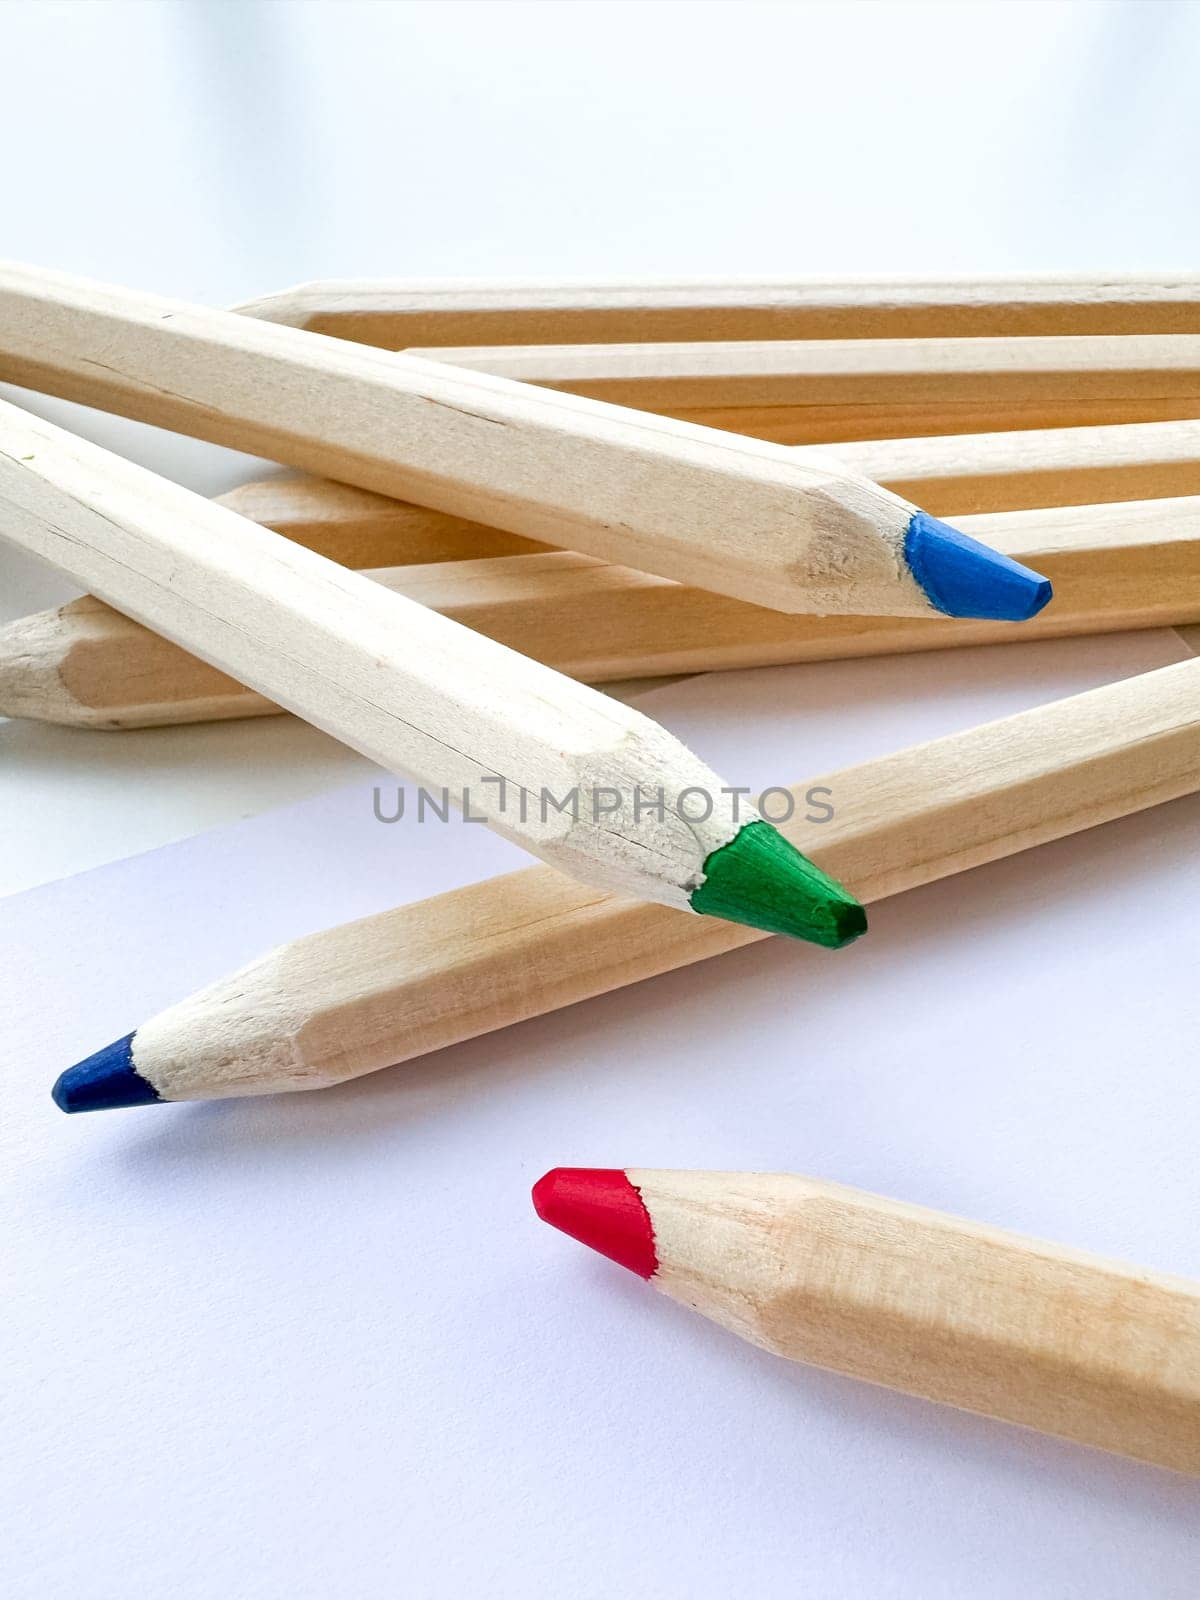 Wooden colorful ordinary pencils isolated on a white background by Lunnica